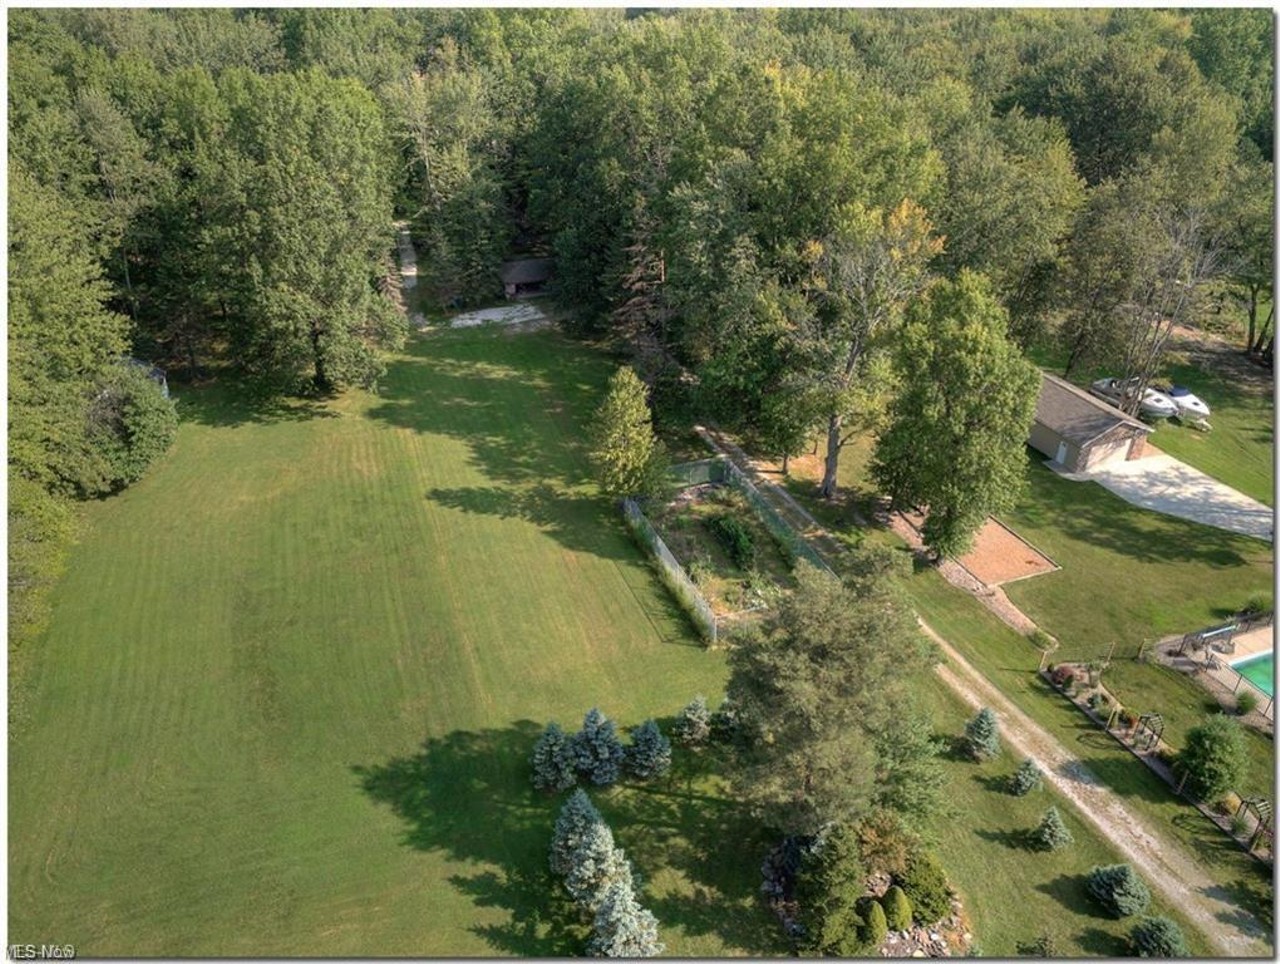 For Sale At $629,000, This North Royalton Home Has A Deluxe Outdoor Bocce Ball Setup